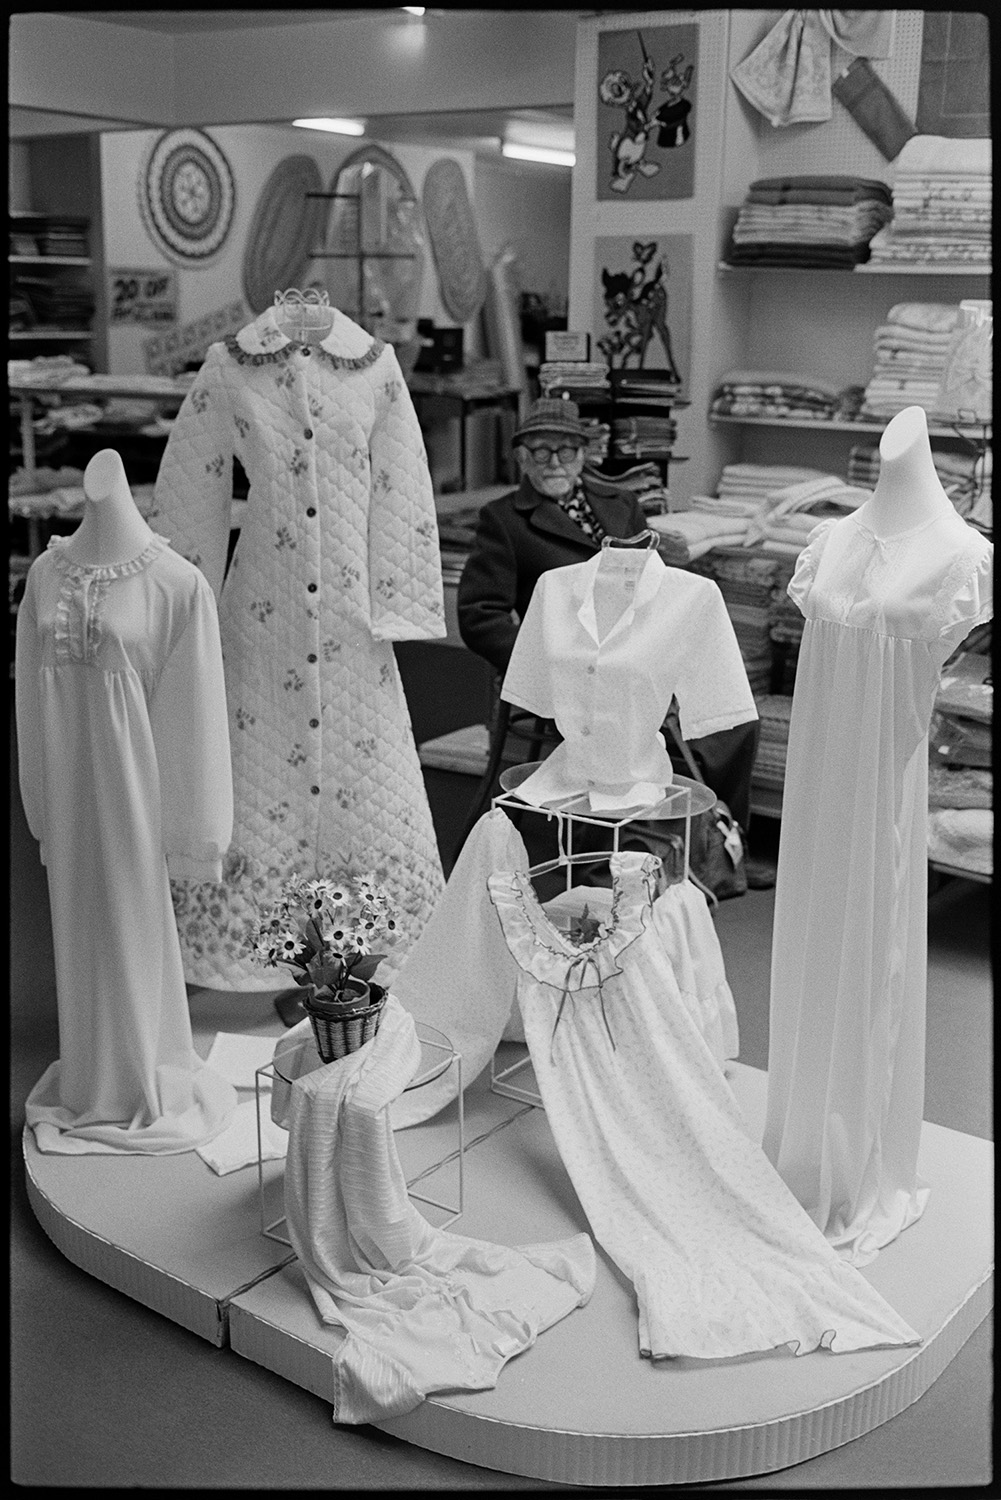 Clothes display in shop, ladies, women's nightwear, dressing gown. 
[A display of women's nightwear, including a dressing gown, in Trapnells clothes shop in Bideford High Street. A man sat on a chair and more clothes stacked on shelves can be seen in the background of the shop.]